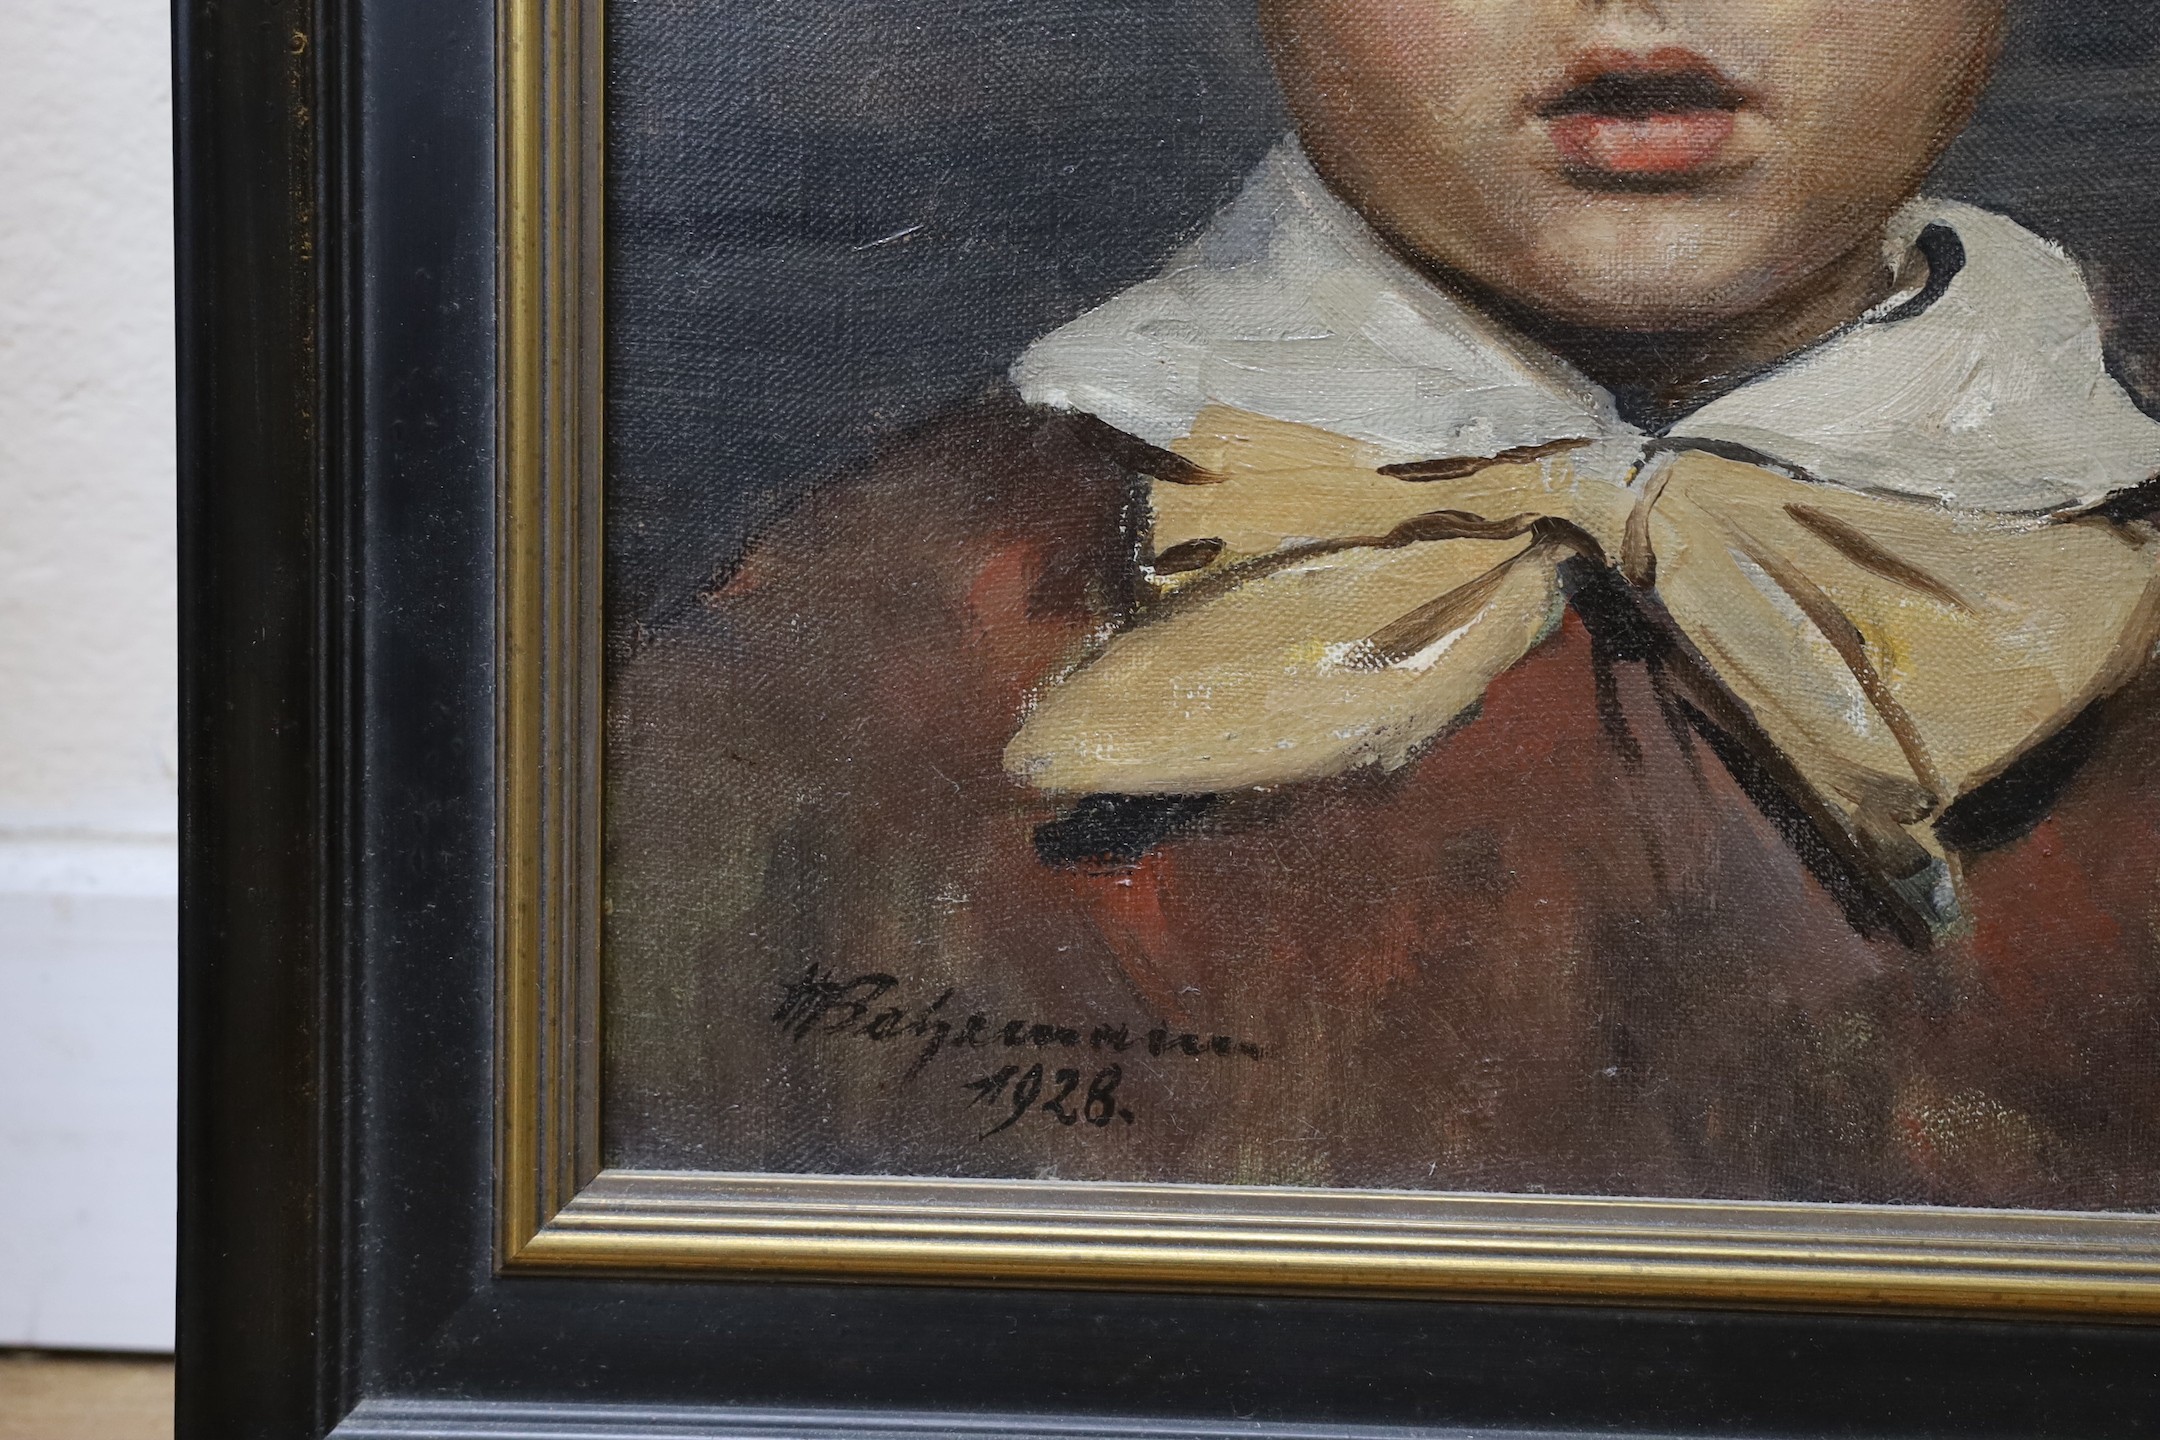 German School, oil on canvas, portrait of a young boy, indistinctly signed and dated 1928, 39 x 33cm.